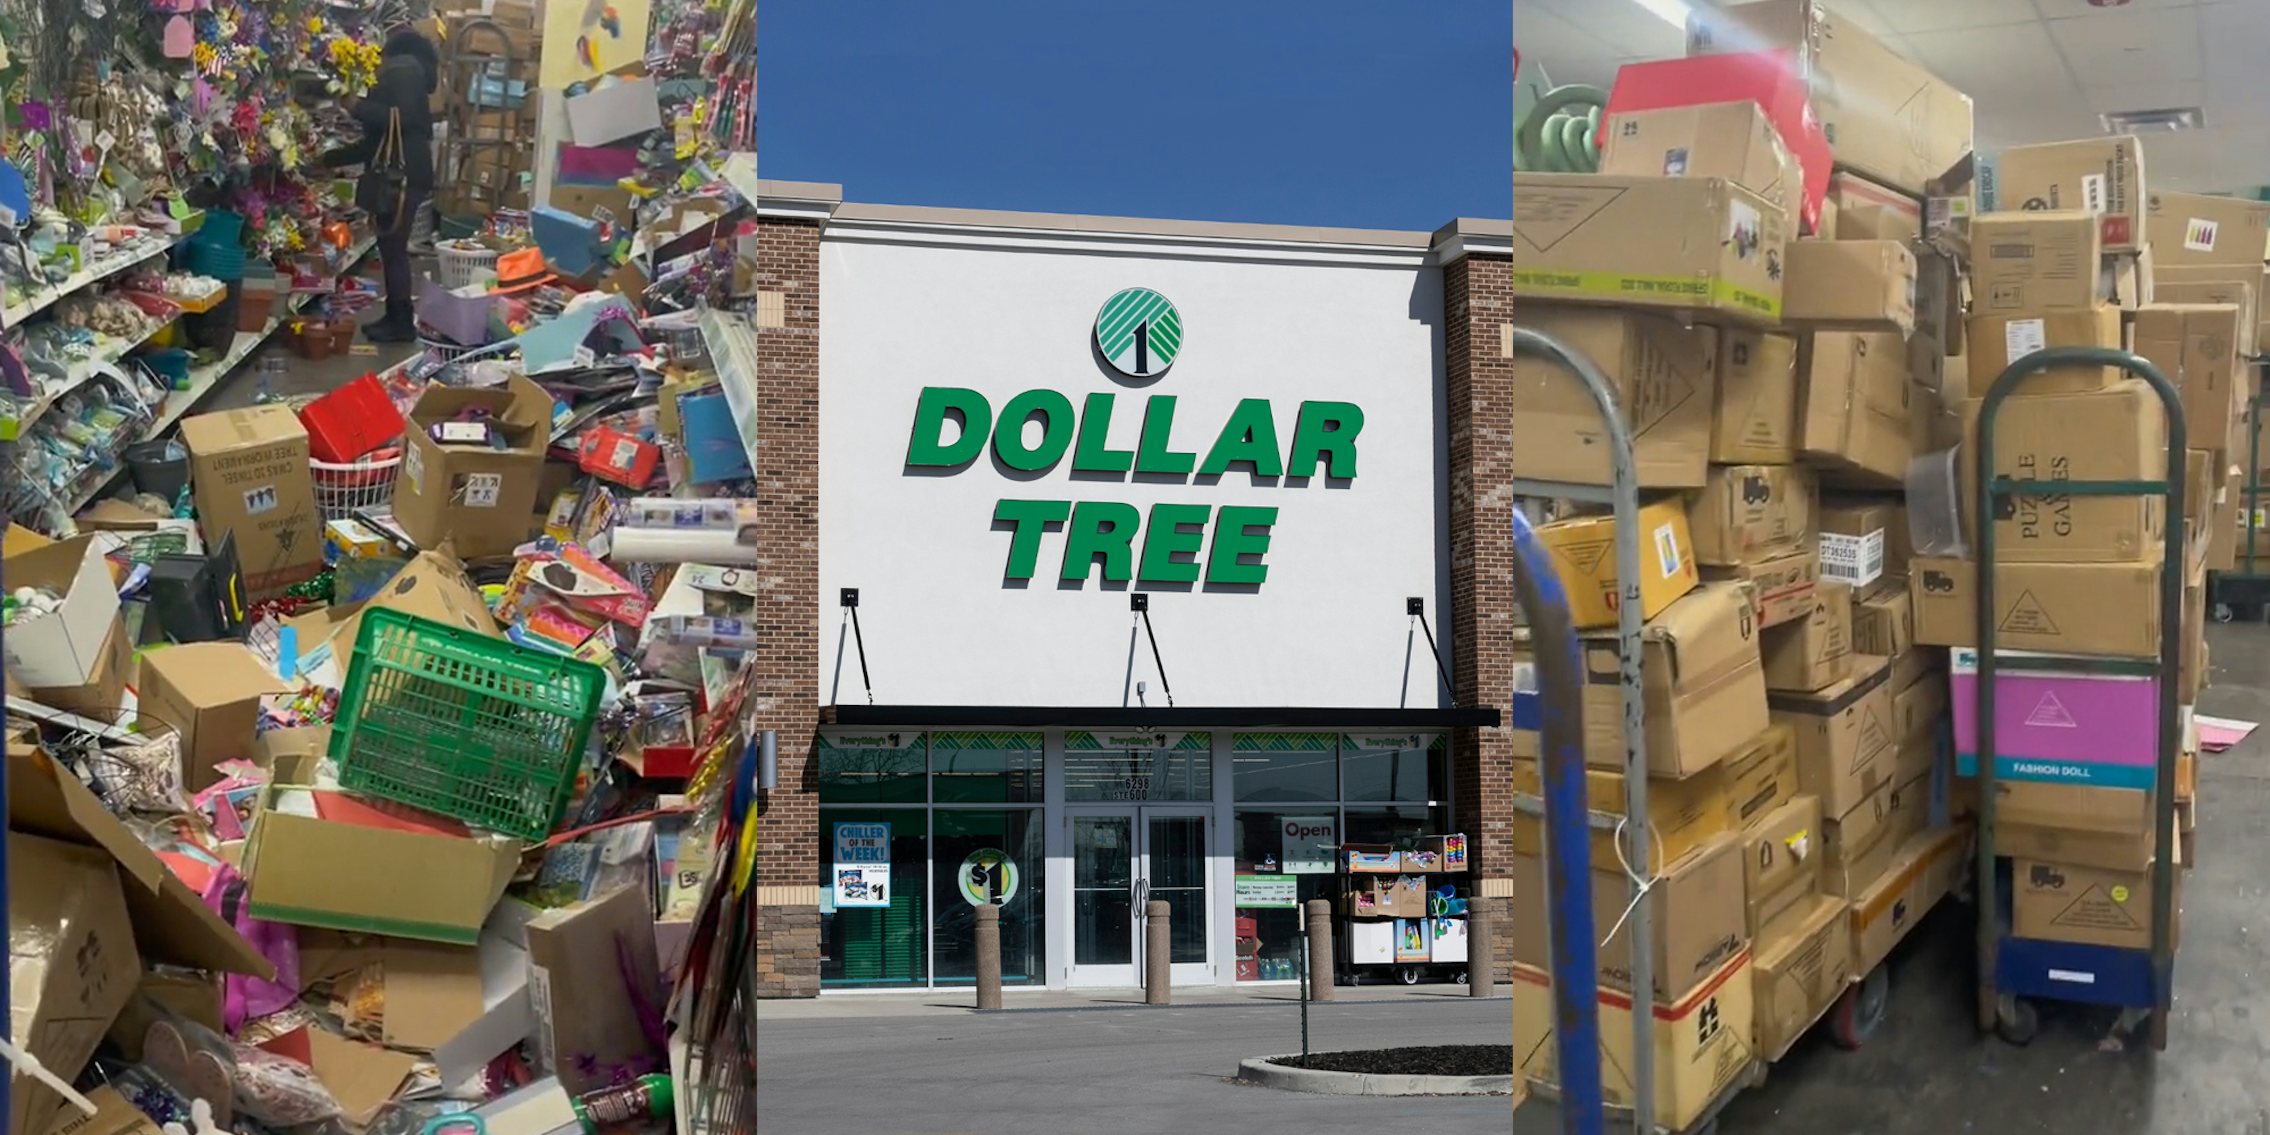 Dollar Tree aisle with inventory all over the floor blocking other entrance to aisle (l) Dollar Tree sign on building (c) Dollar Tree interior with inventory in boxes everywhere (r)